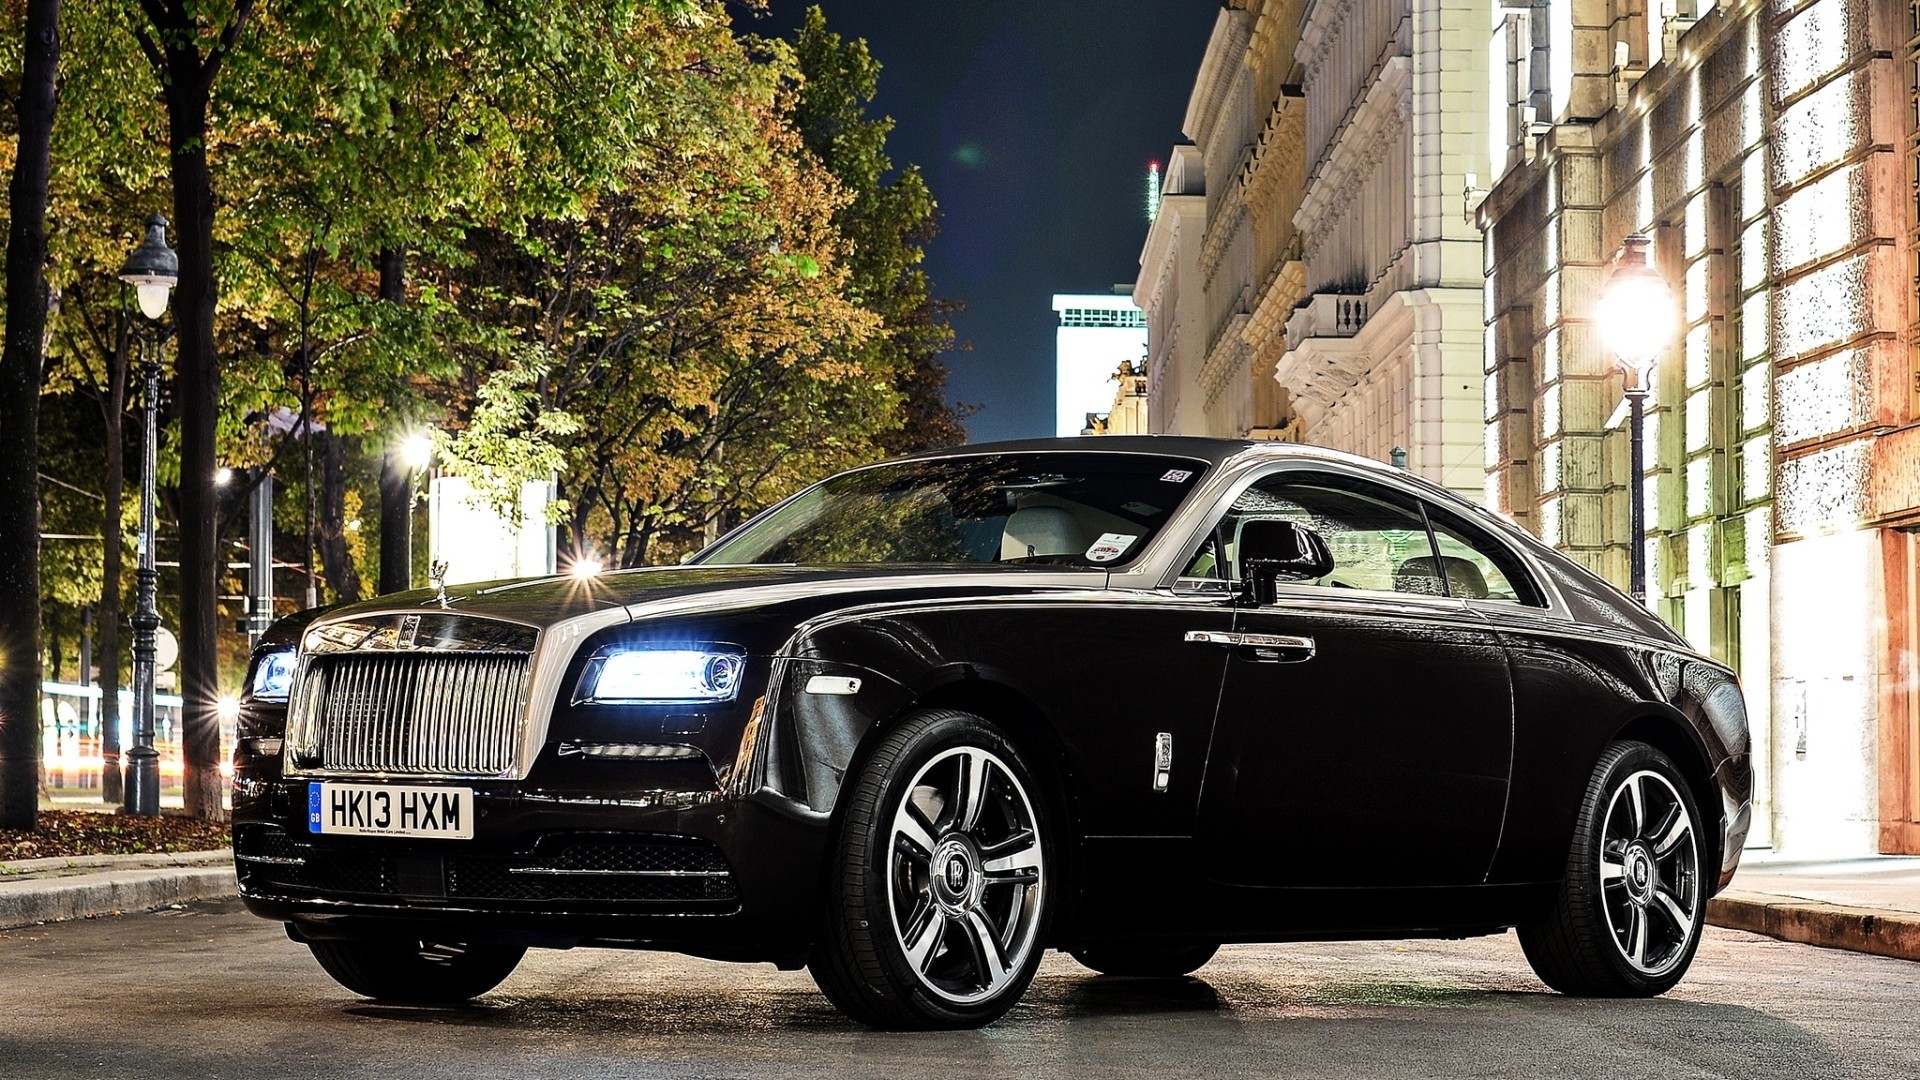 Rolls Royce Cars Wallpapers | Free Download HD Latest Motors Images |  Android | Pinterest | Rolls royce cars, Wallpaper free download and  Wallpaper